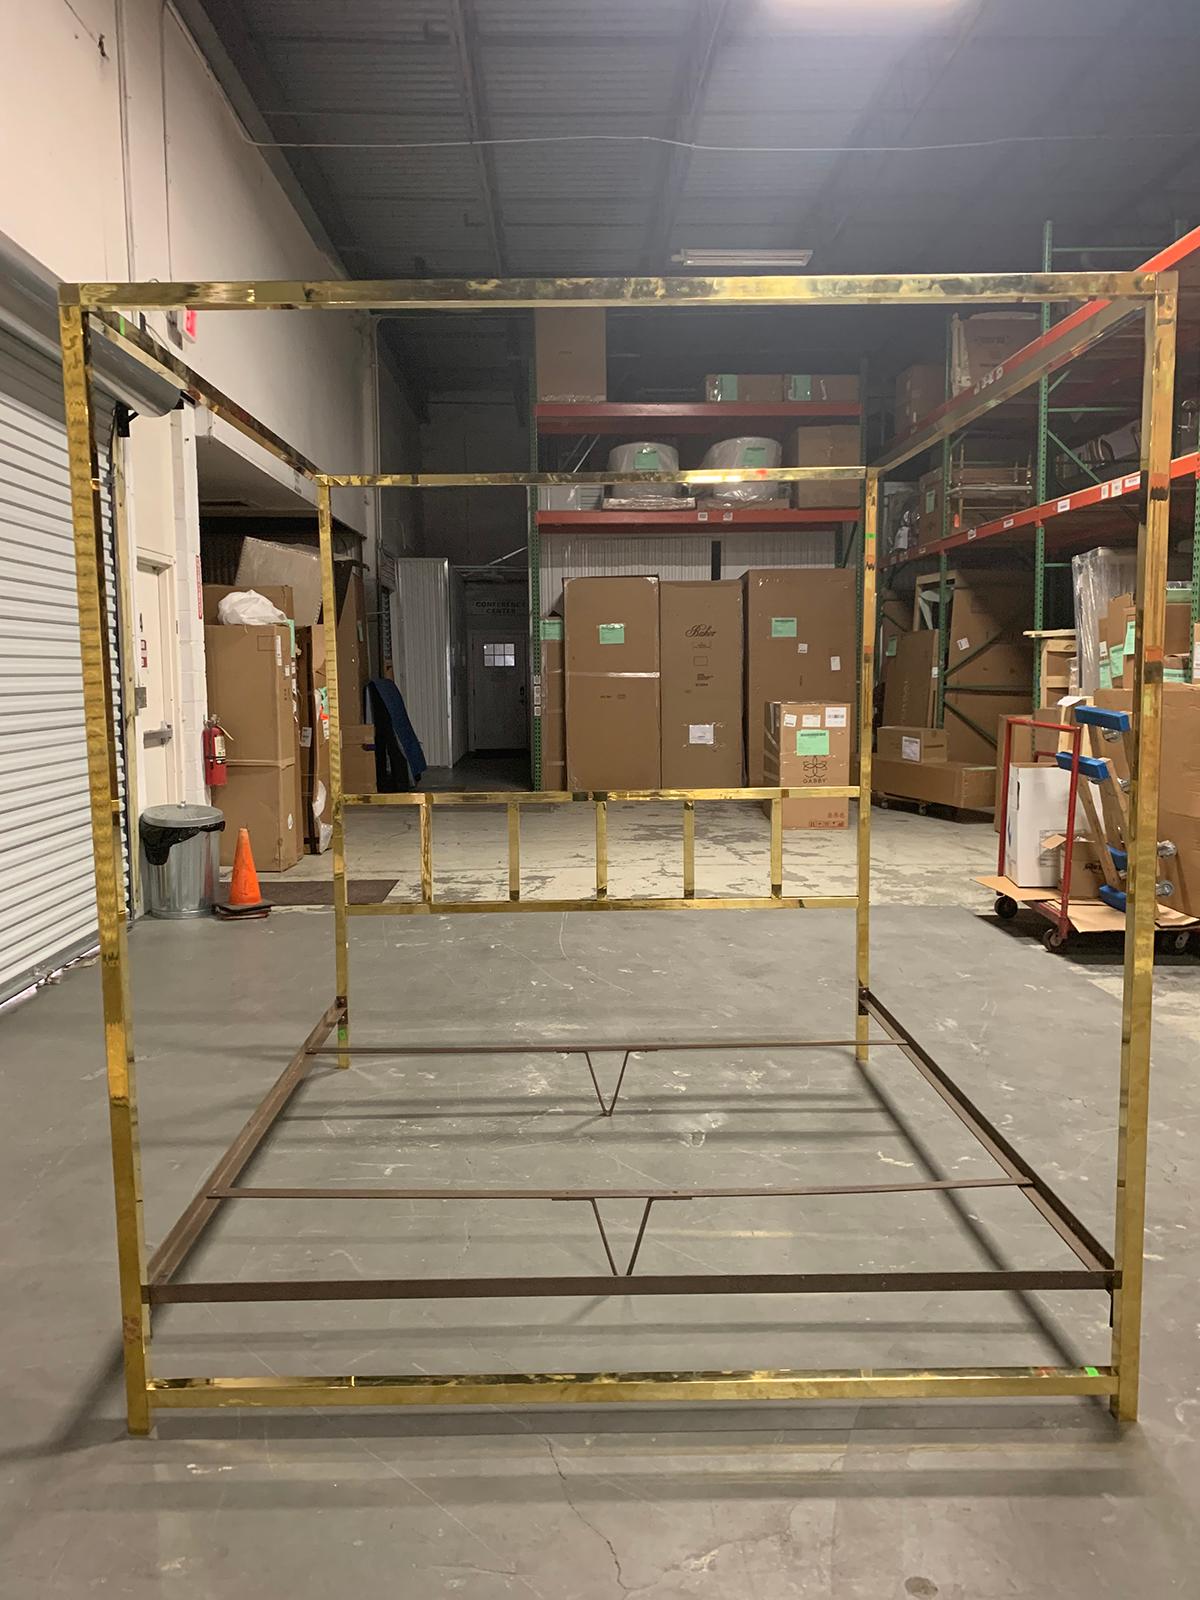 Mid-20th century brass bed in the style of Maison Jansen
Overall dimensions: 76.25